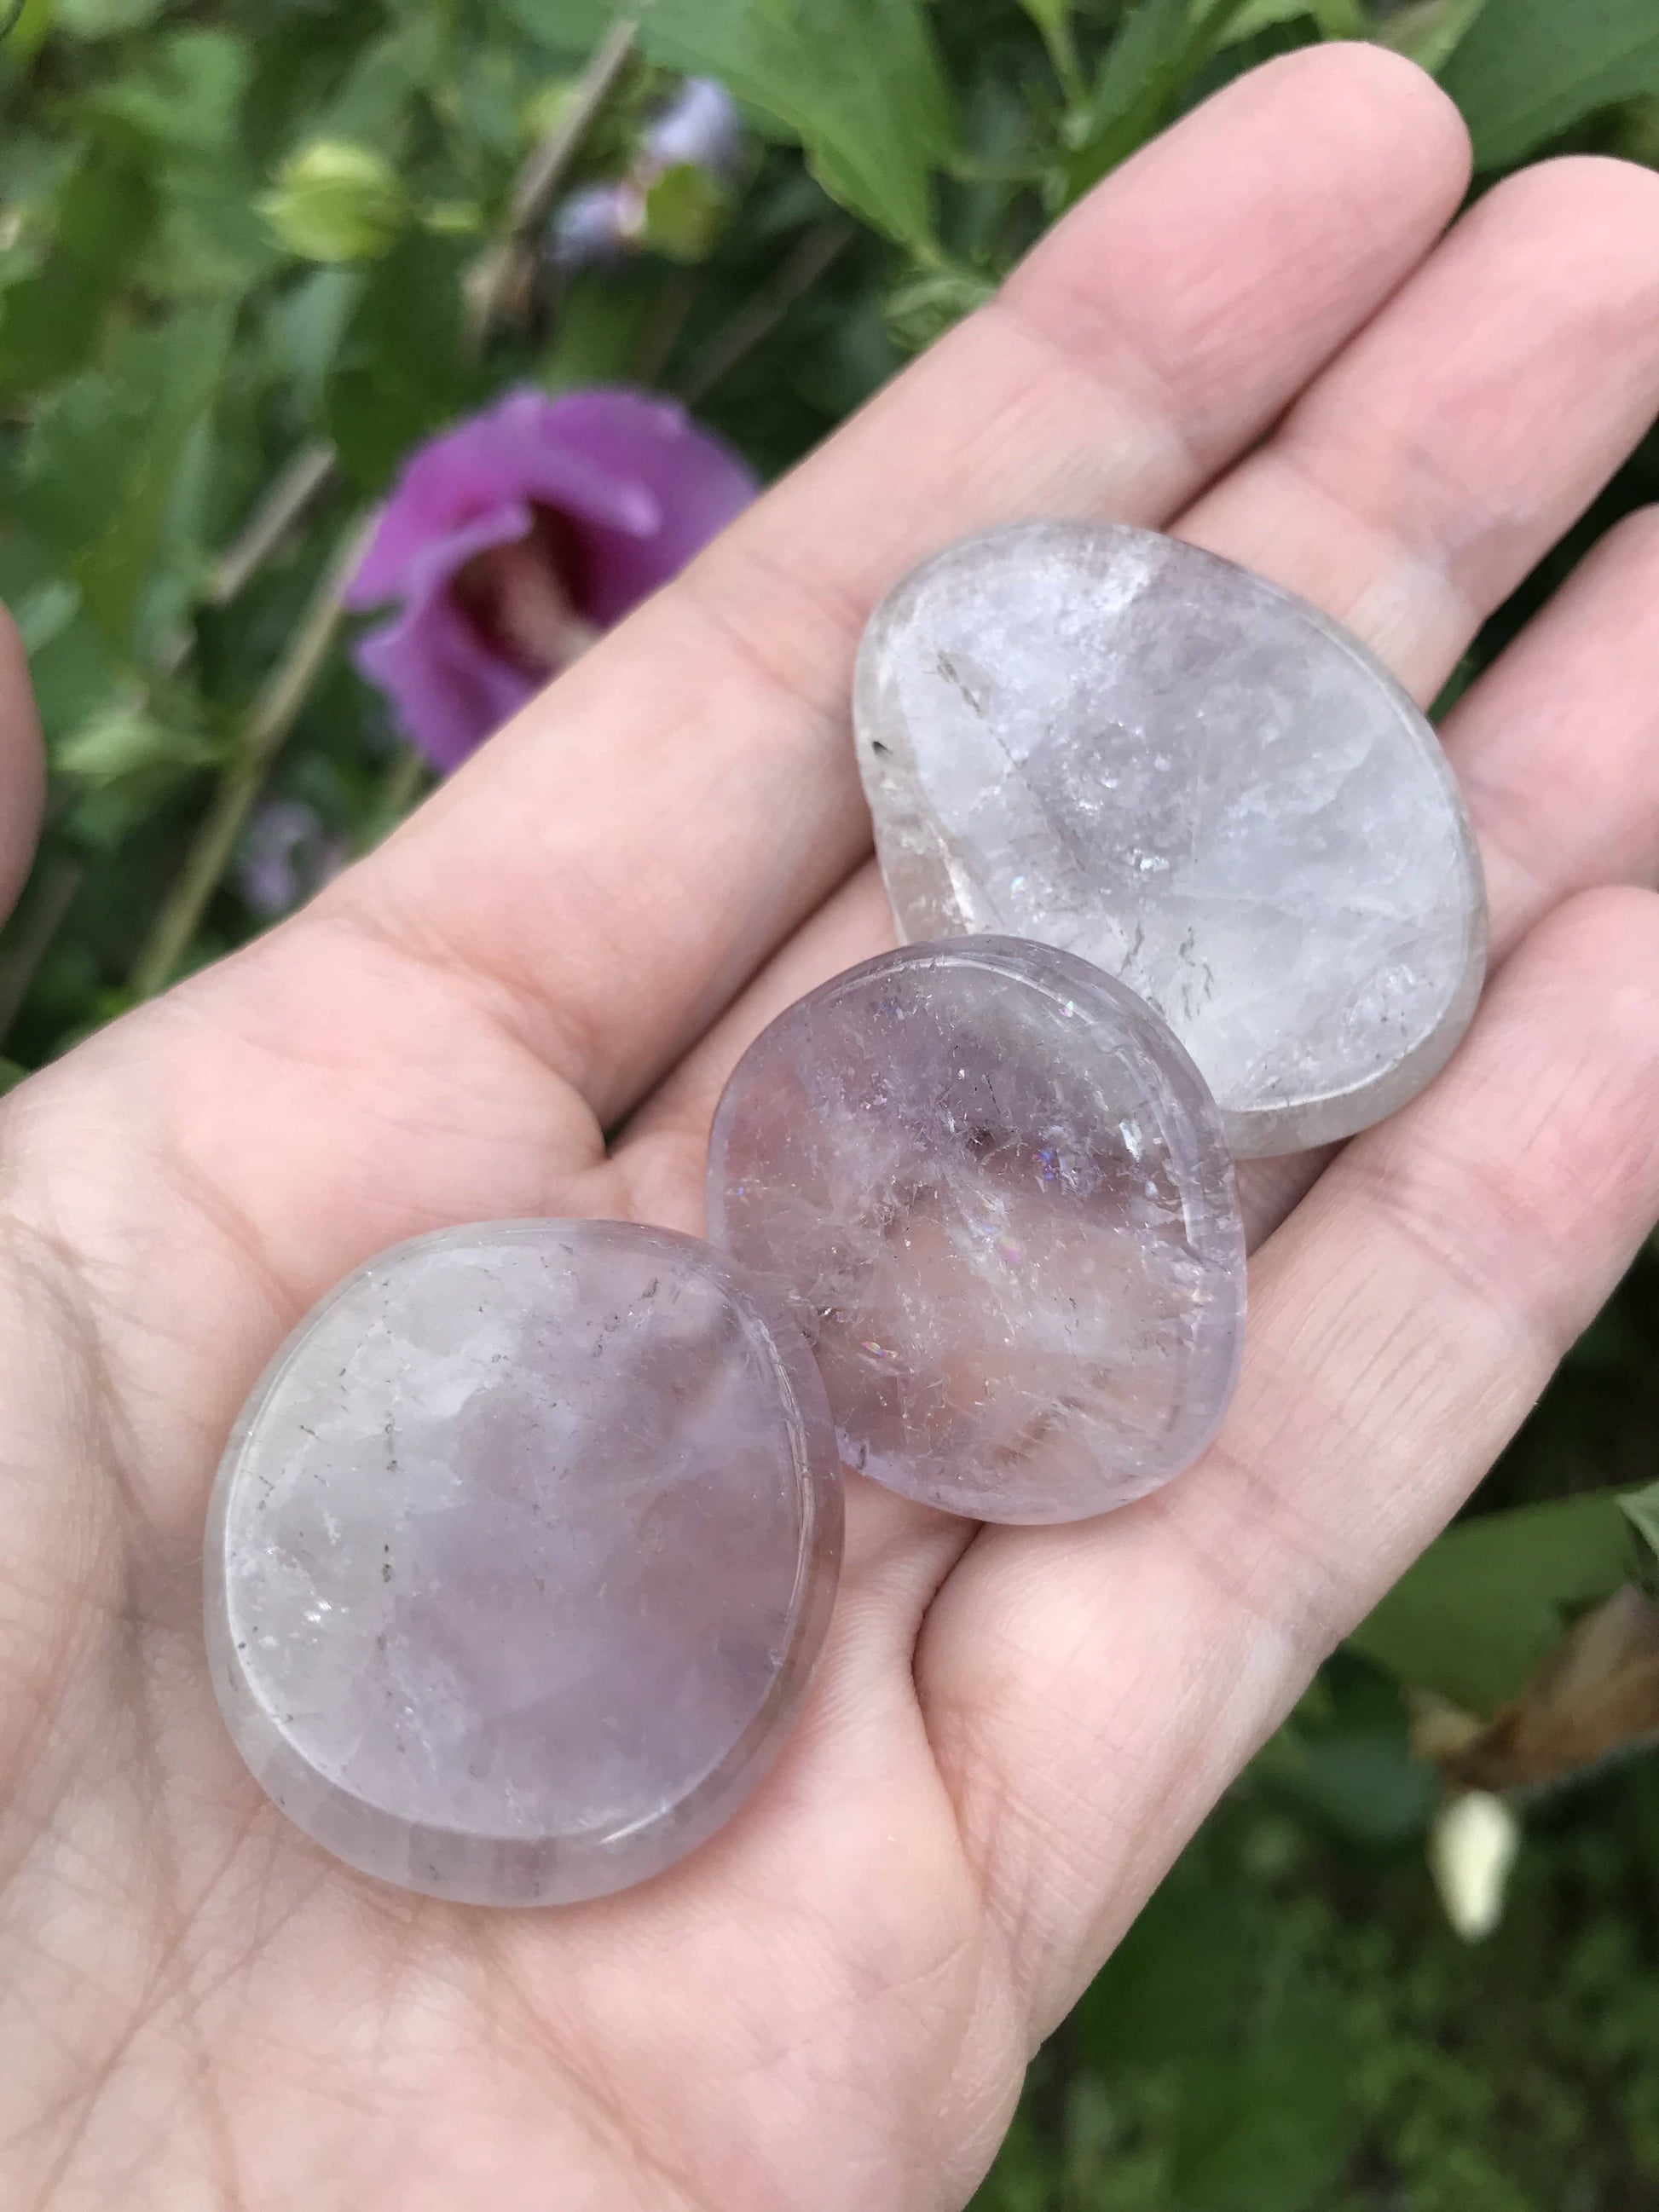 amethyst carved and polished into disk like shapes.